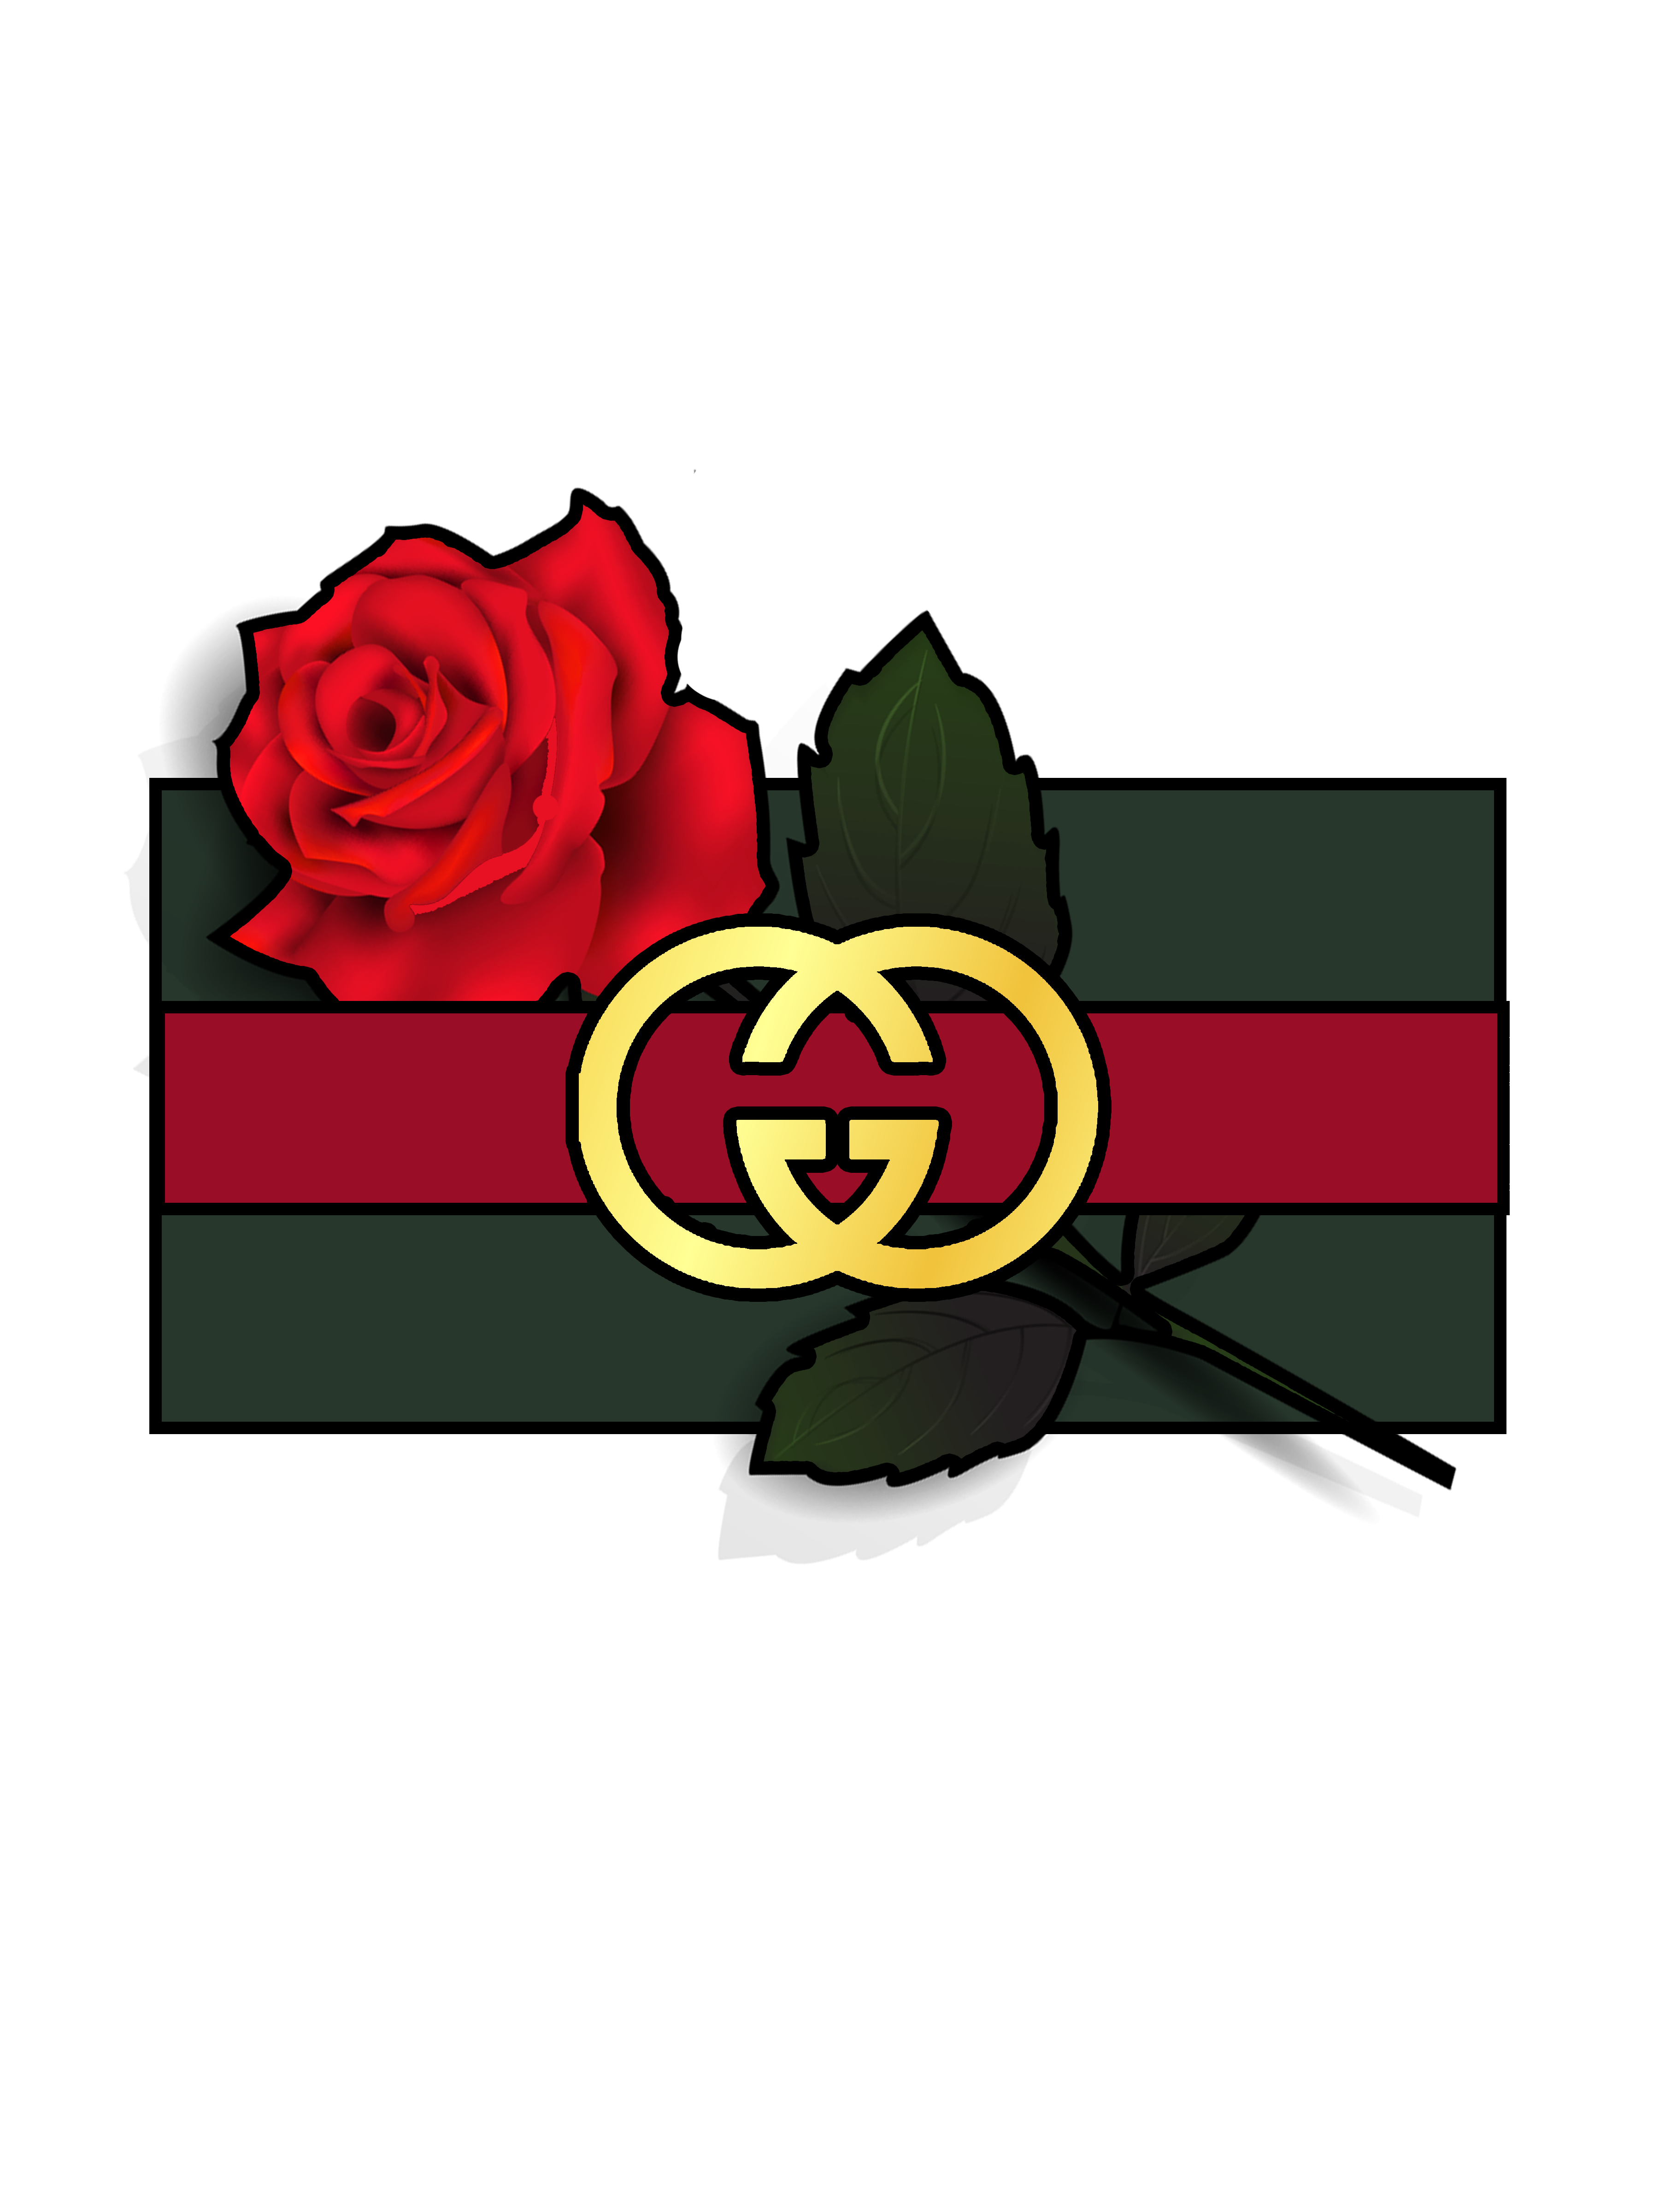 Gucci PNG Free Download